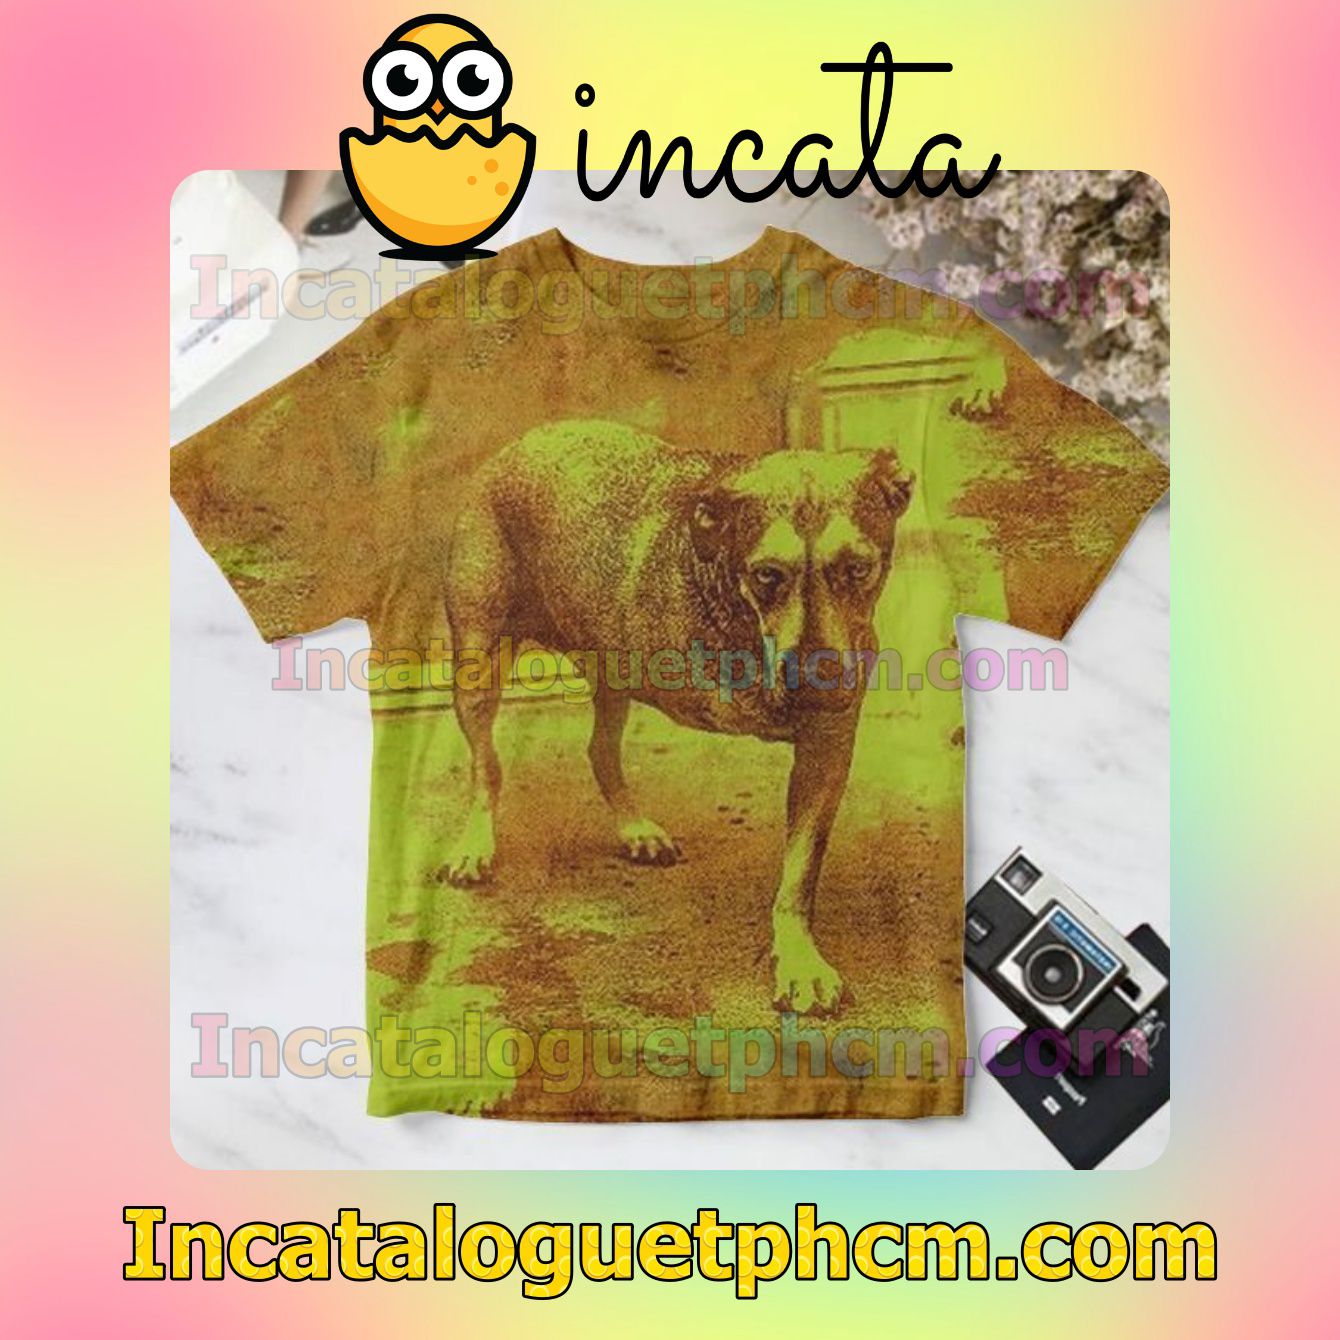 Alice In Chains The Third Self-titled Album Cover For Fan Personalized T-Shirt